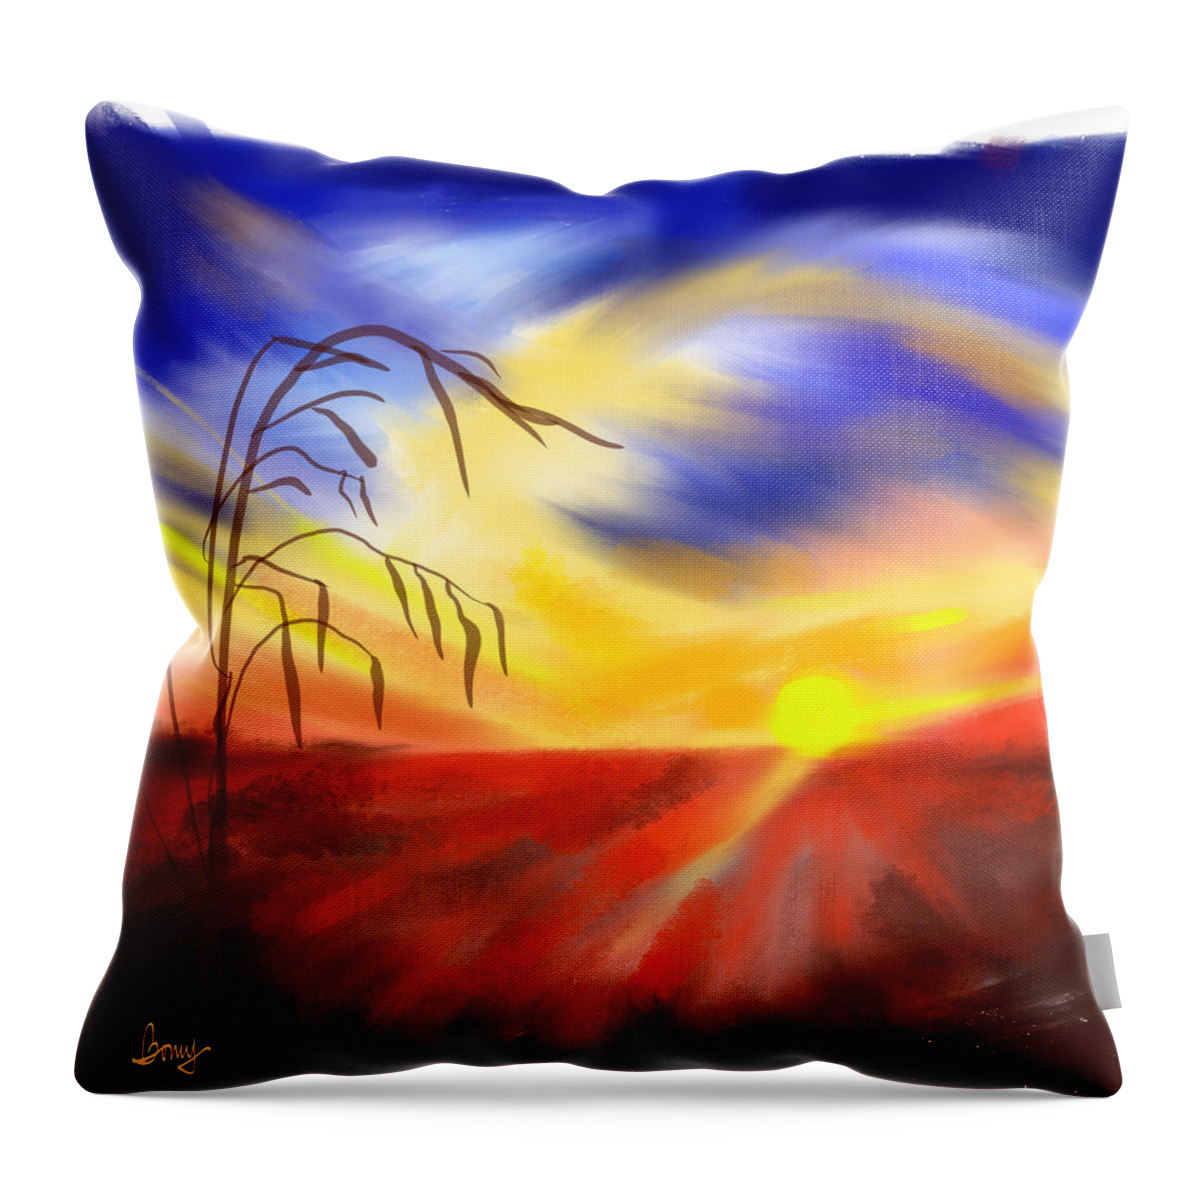 Digital Throw Pillow featuring the digital art Sometimes You Have To Pause by Bonny Butler